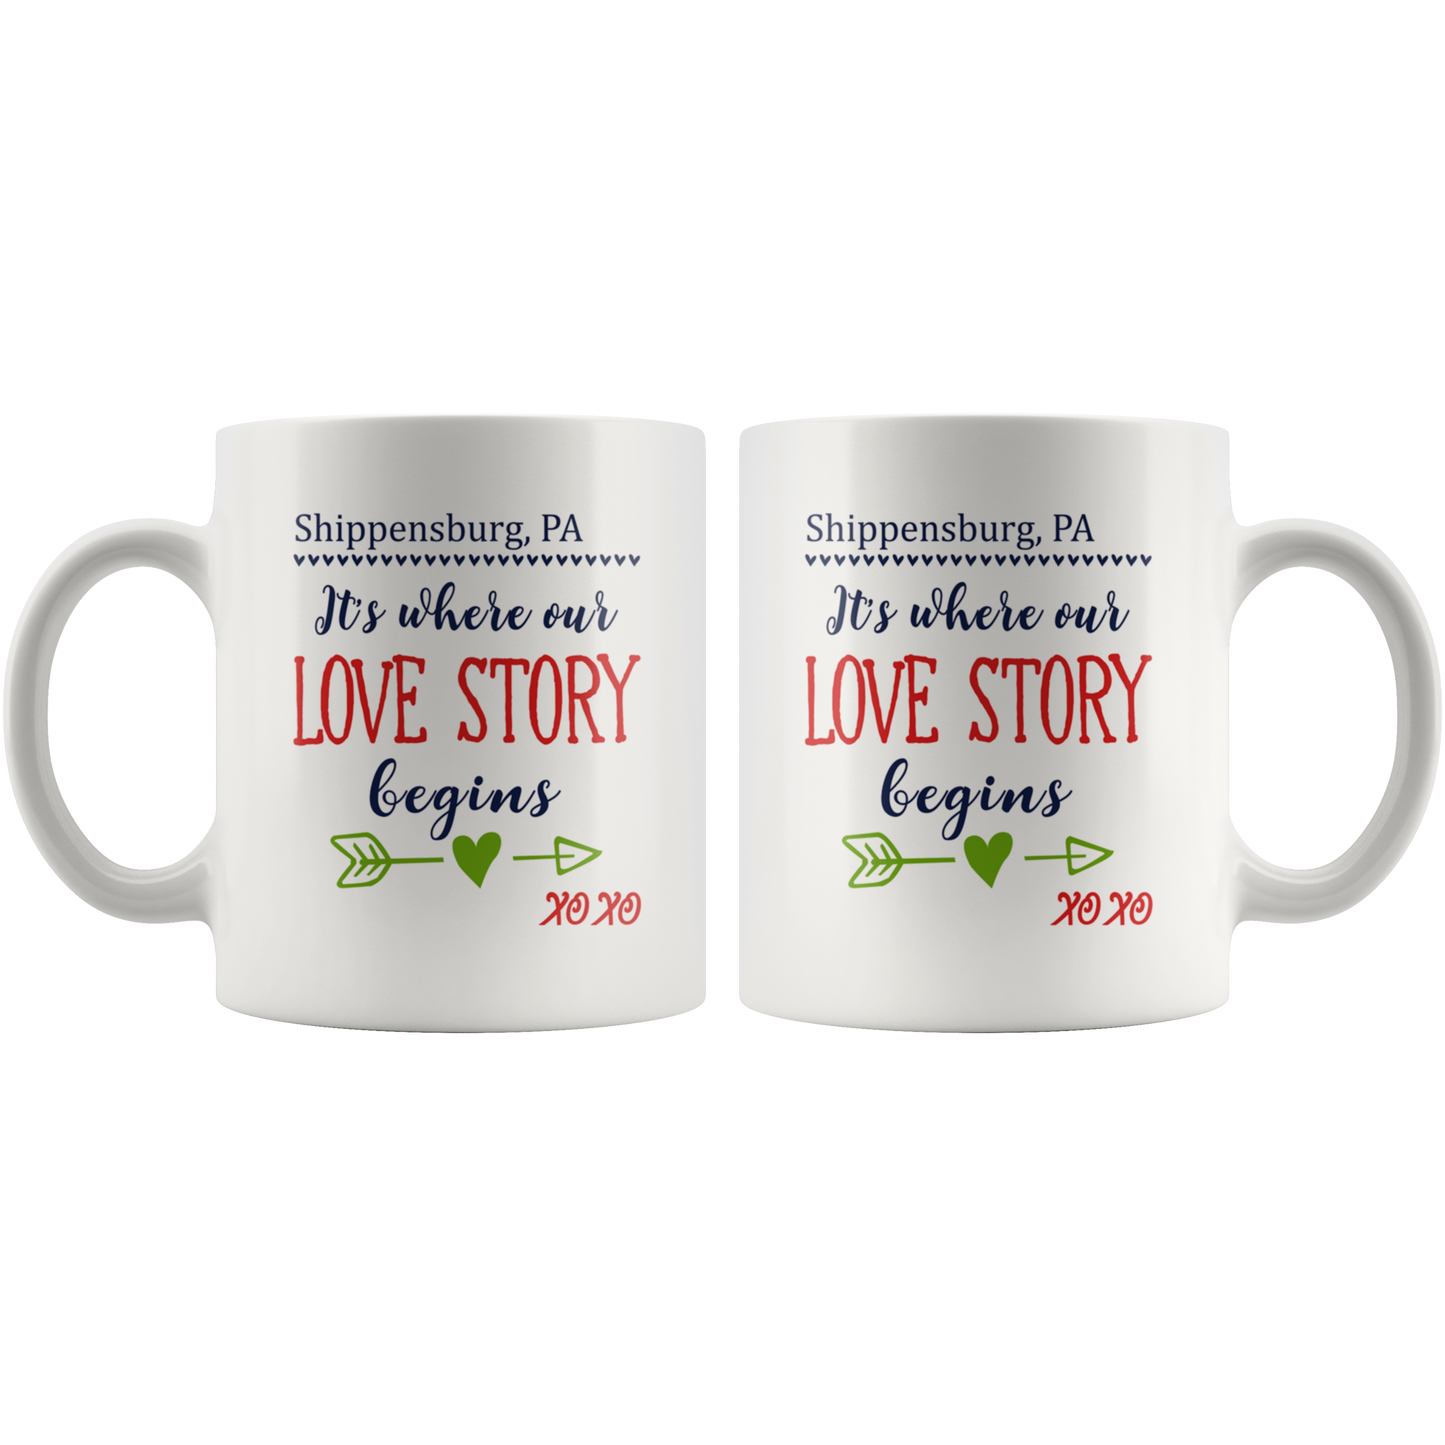 M-Our-20459856-sp-18756 - Mothers Day Gifts For Wife Mug - Shippensburg Pennsylvania P